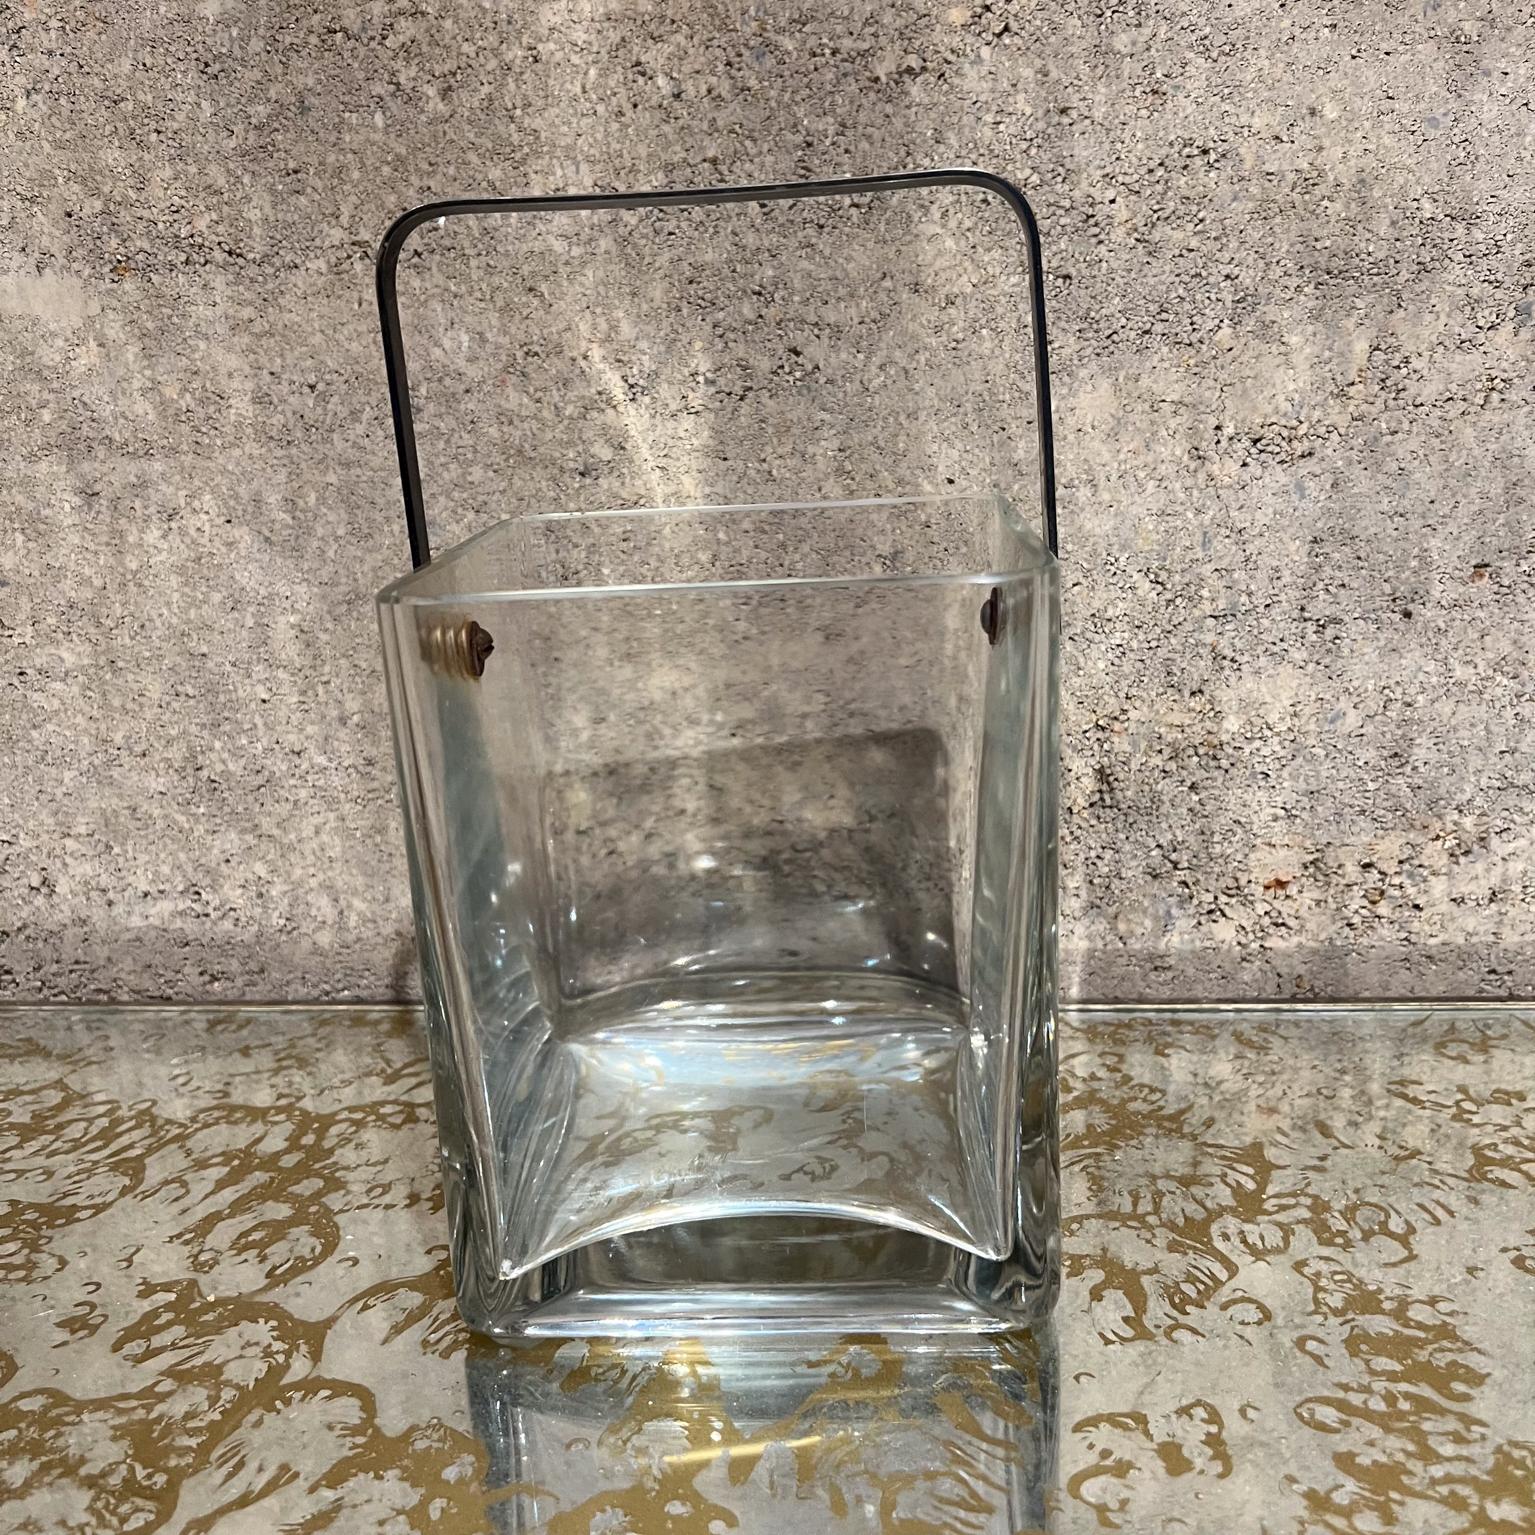 
Crystal Glass Ice Bucket Silver Plate Handle
Square shape with curve around edges.
Clean modern lines
Unmarked.
Attributed design style Cristal de Sèvres
10.25 to top, 7 h to glass x 5.5 x 5.5   
Original vintage condition unrestored
Handle appears